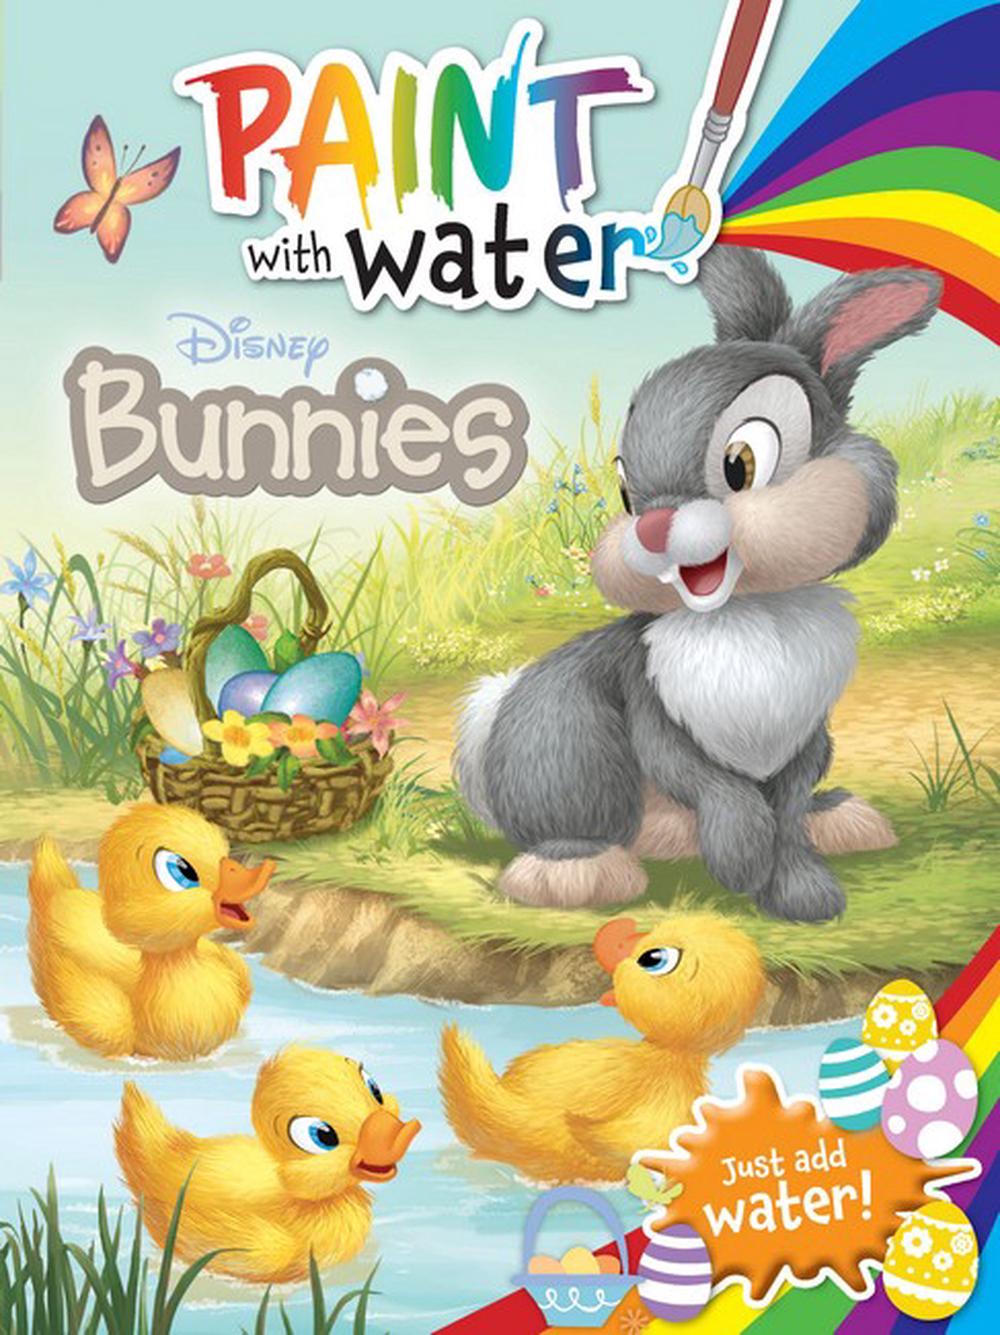 Disney Bunnies Paint with Water - Otakugadgets